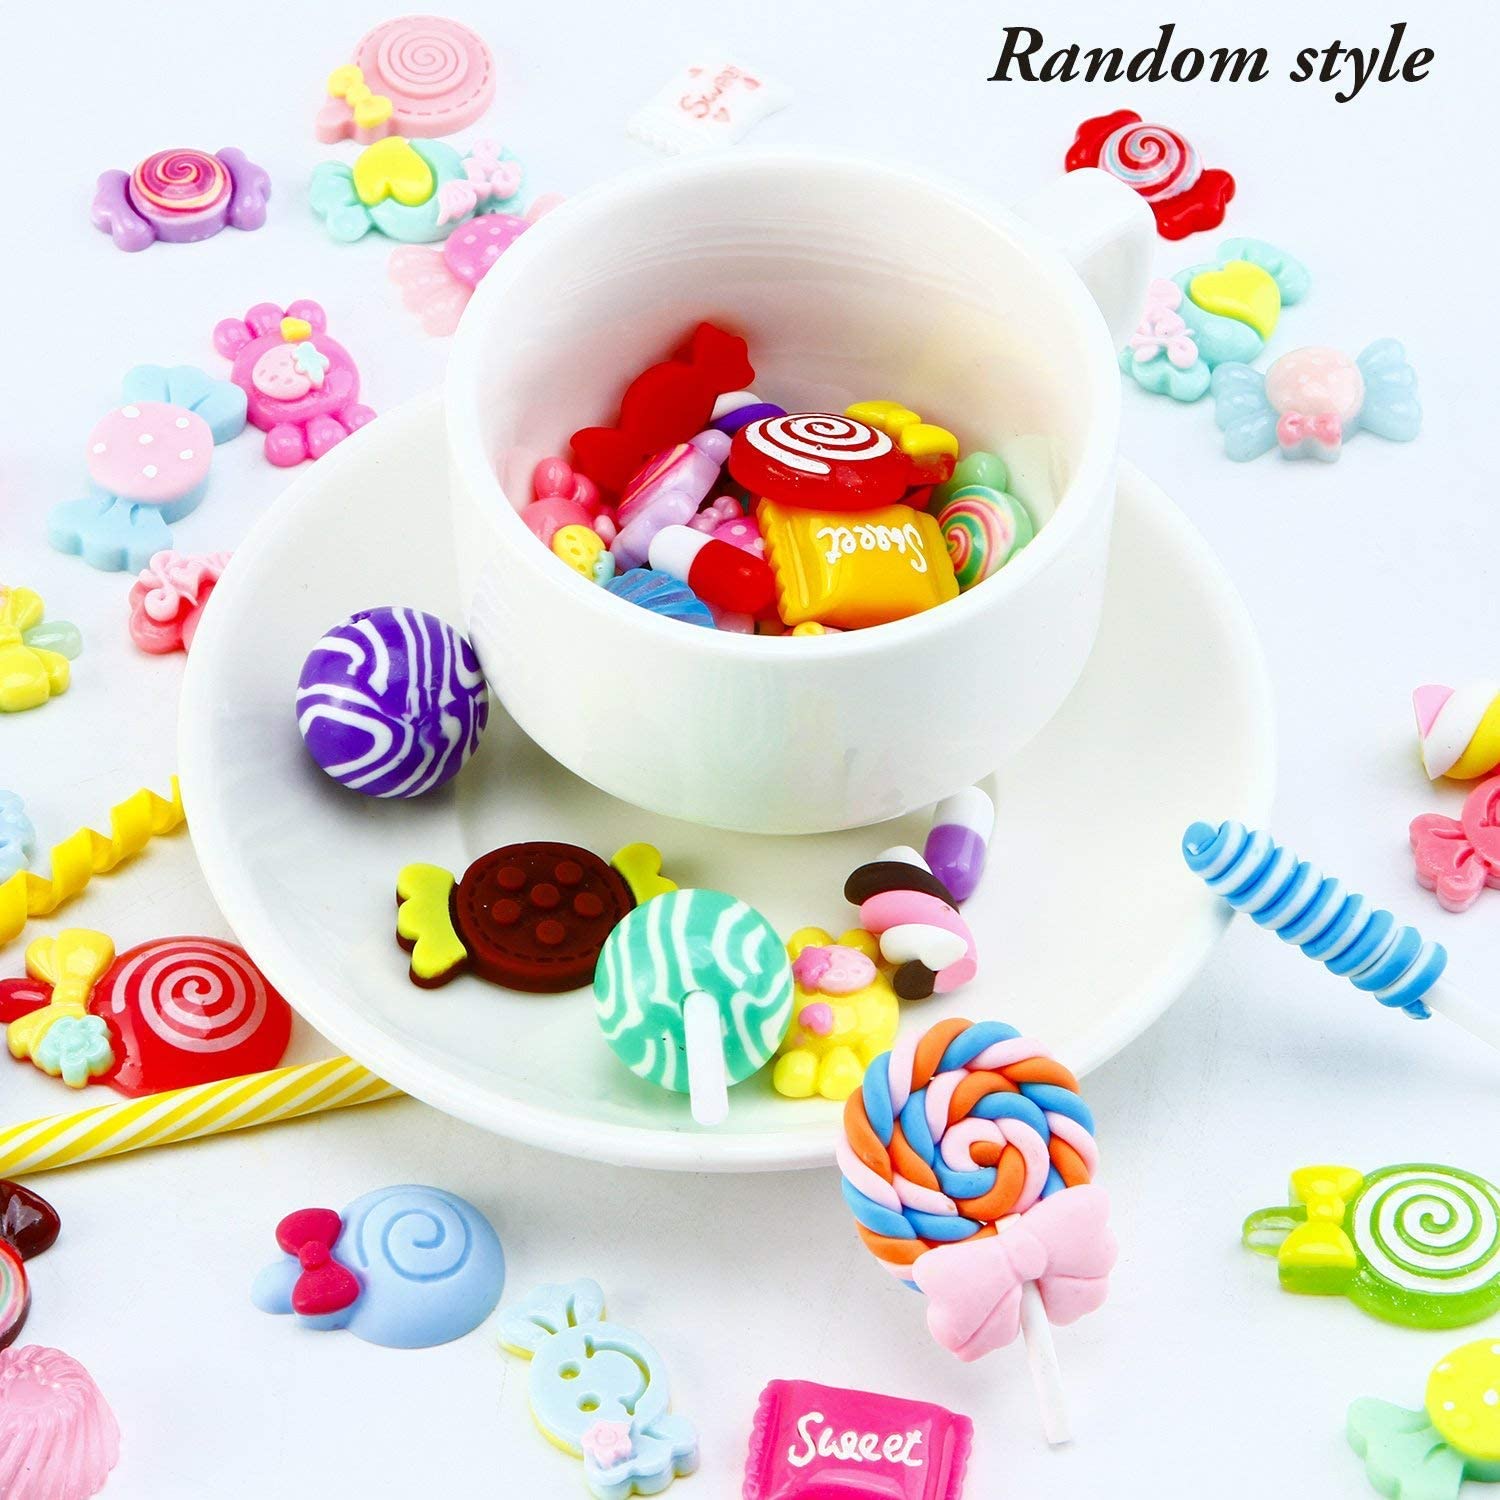 acdanc LNKOO Resin Flatback Charms,60pcs Slime Charms and Containers Mixed Candy Cake Sweets Resin Cabochons for DIY Crafts,Scrapbooking,Jewelry Making Mixed Resin Flatback Slime Beads Making Supplies - image 3 of 8